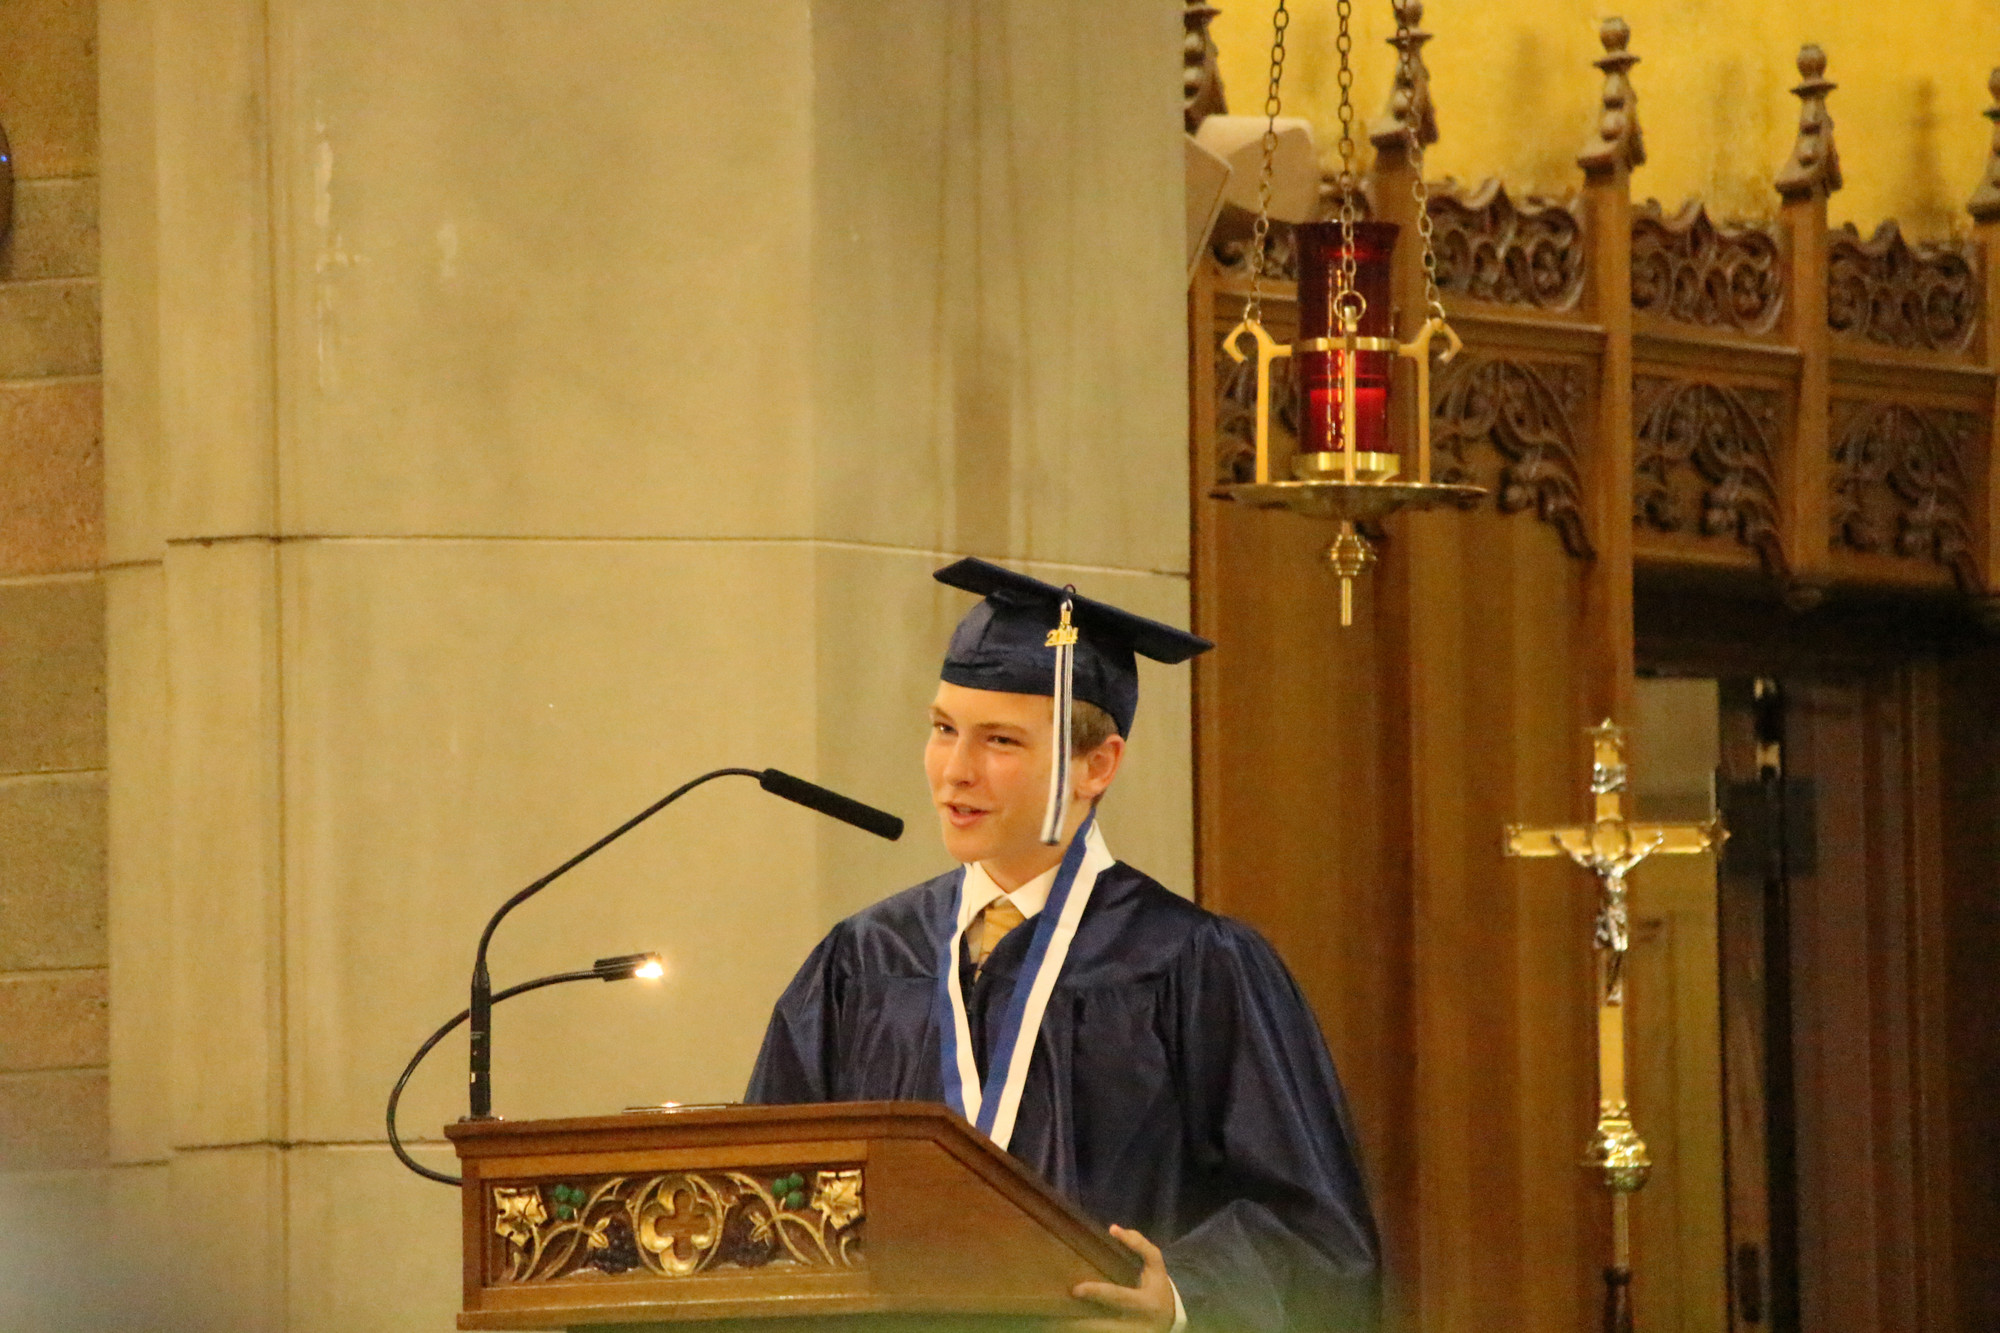 Ryan Herrmann gave a speech of his own, thanking his parents for all of their love and inspiration.